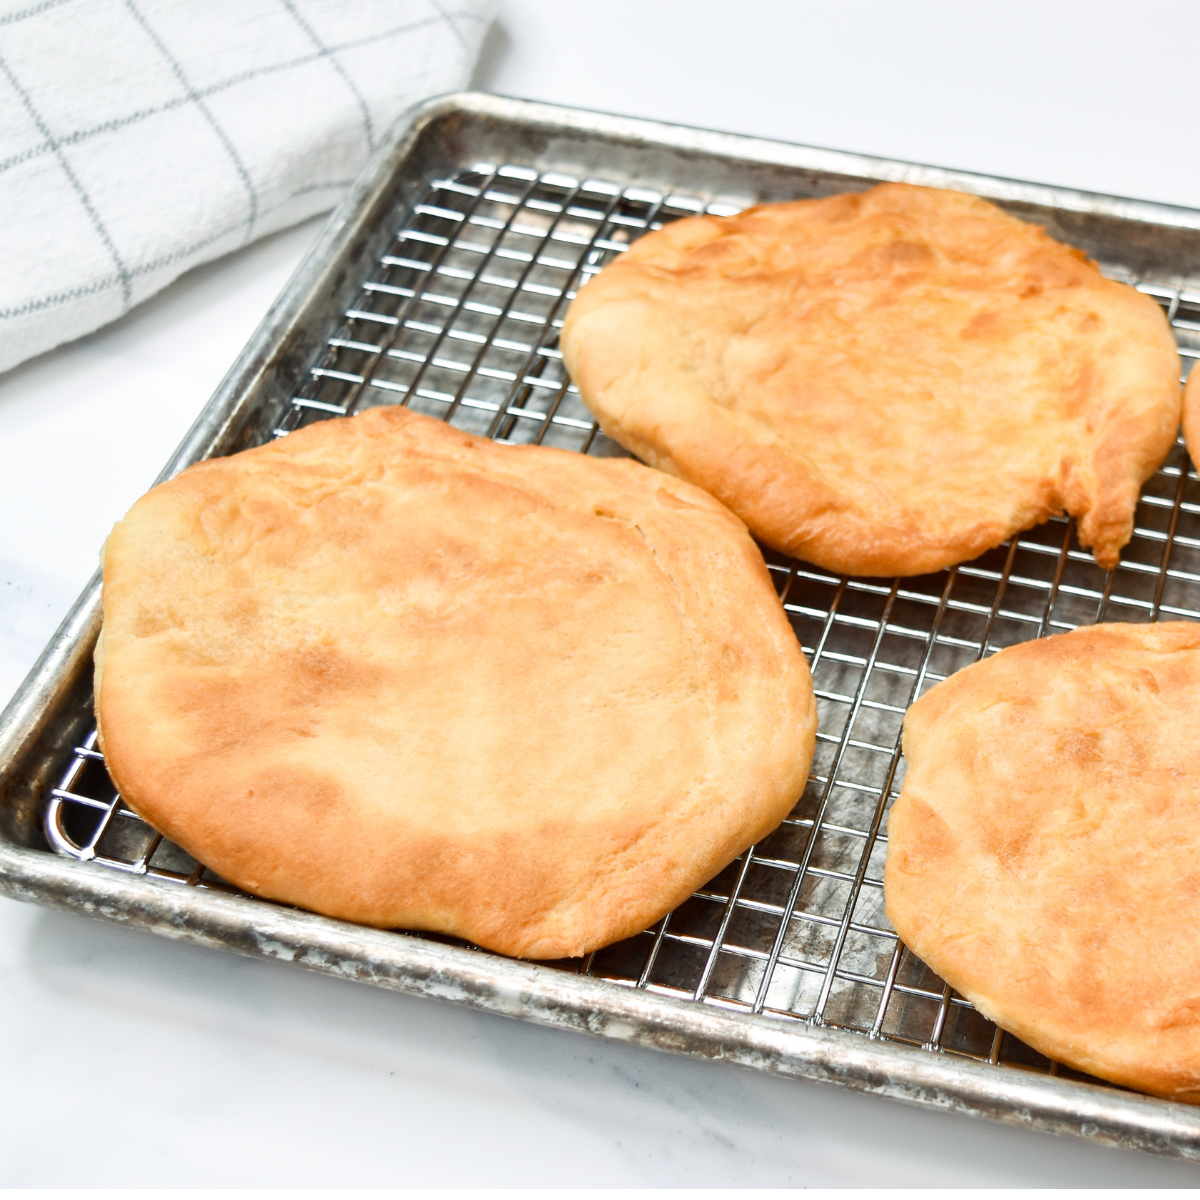 Can You Make Fried Dough In Air Fryer?